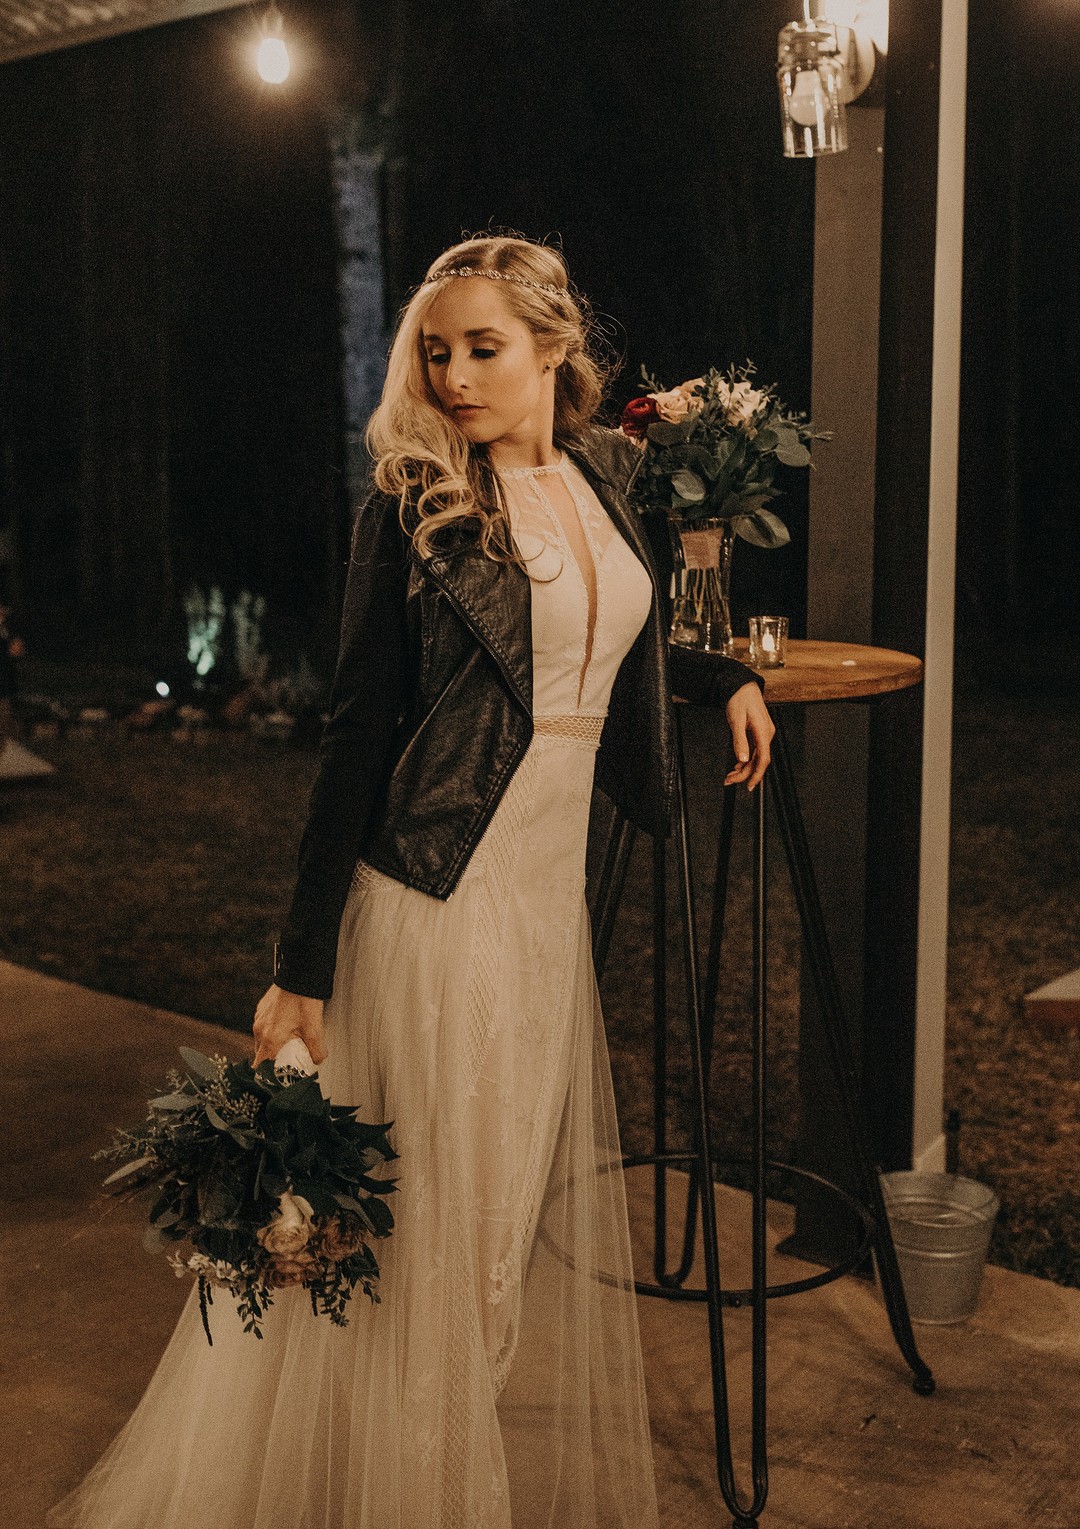 Bride in Leather Jacket